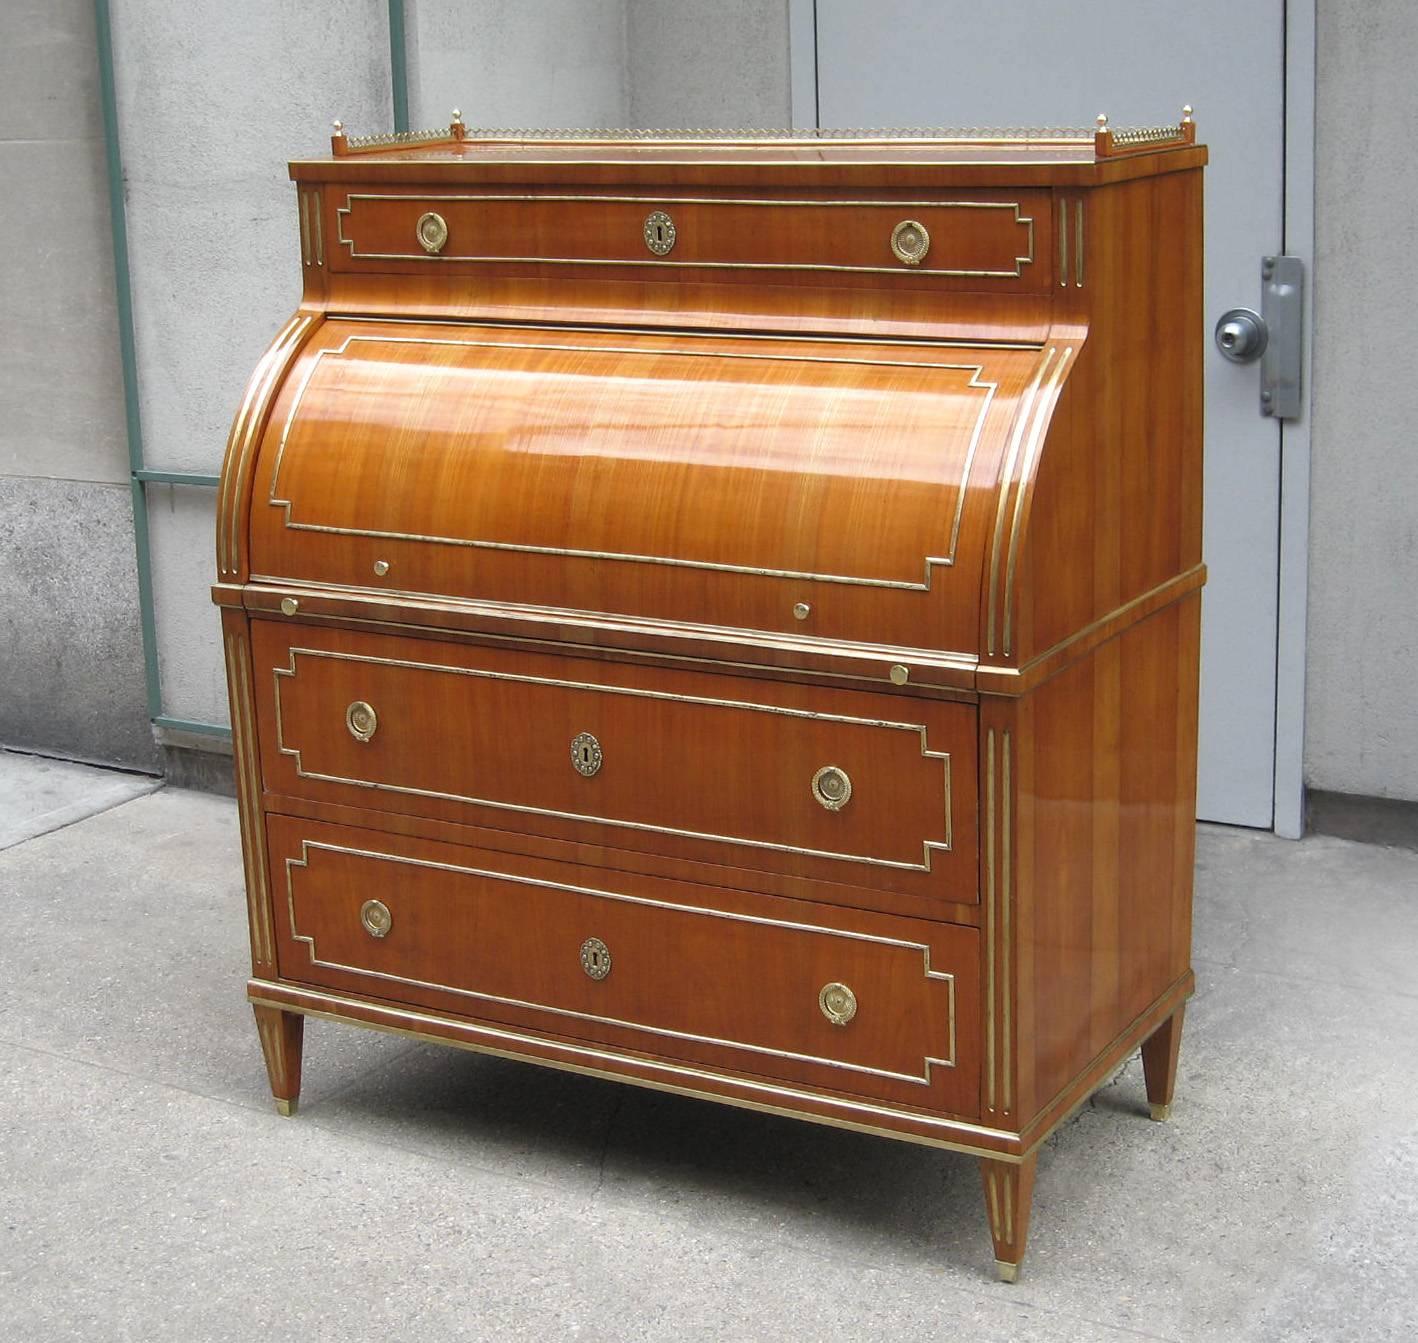 A fine Neoclassical roll-top desk or secretary.
Cherrywood with patinated brass details, pulls, 
escutcheons and sabots. With three drawers and 
four additional smaller drawers inside the roll top.
The writing surface with leather inset can be